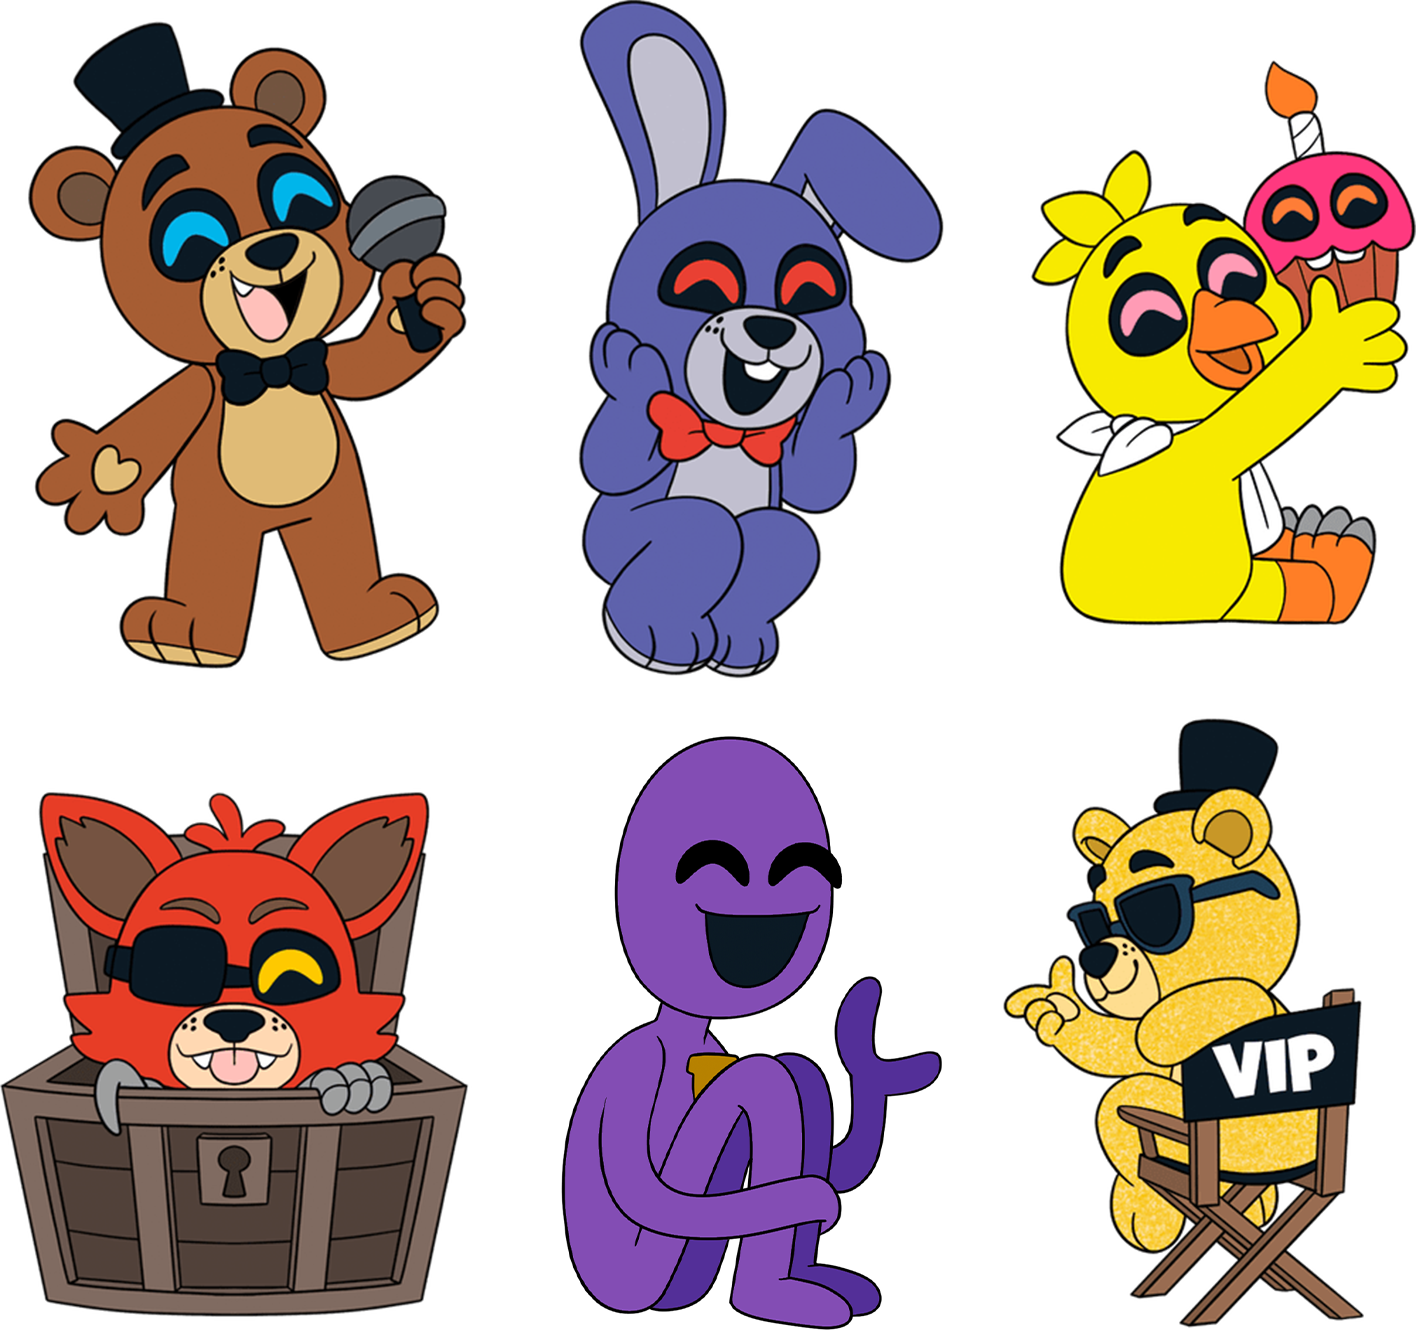 Limited Collector's Edition For FNAF: SECURITY BREACH Coming Soon